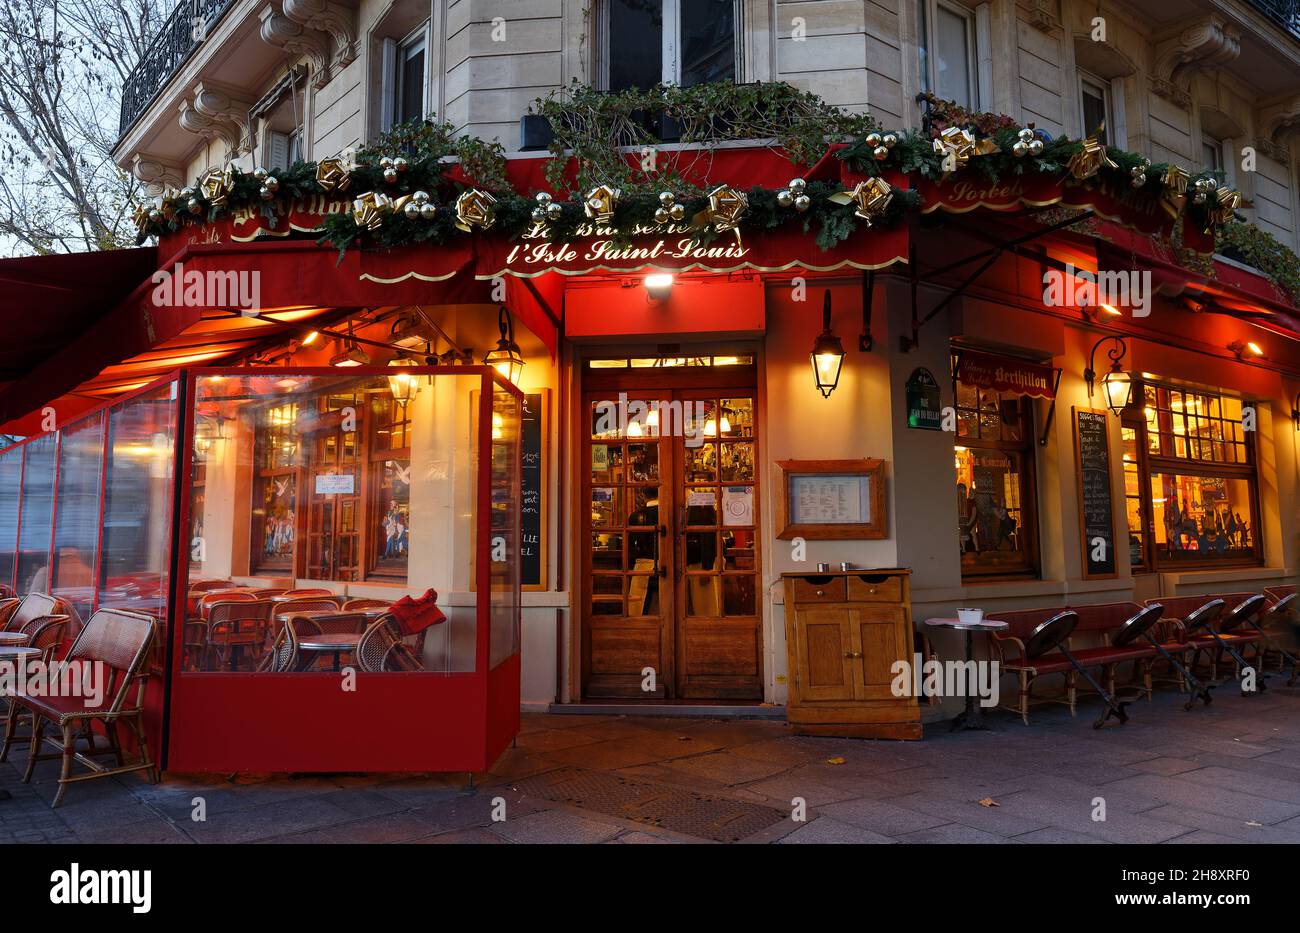 The famous brasserie de l 'Ile Saint Louis decorated for Christmas located near Notre Dame cathedral in Paris, France. Stock Photo